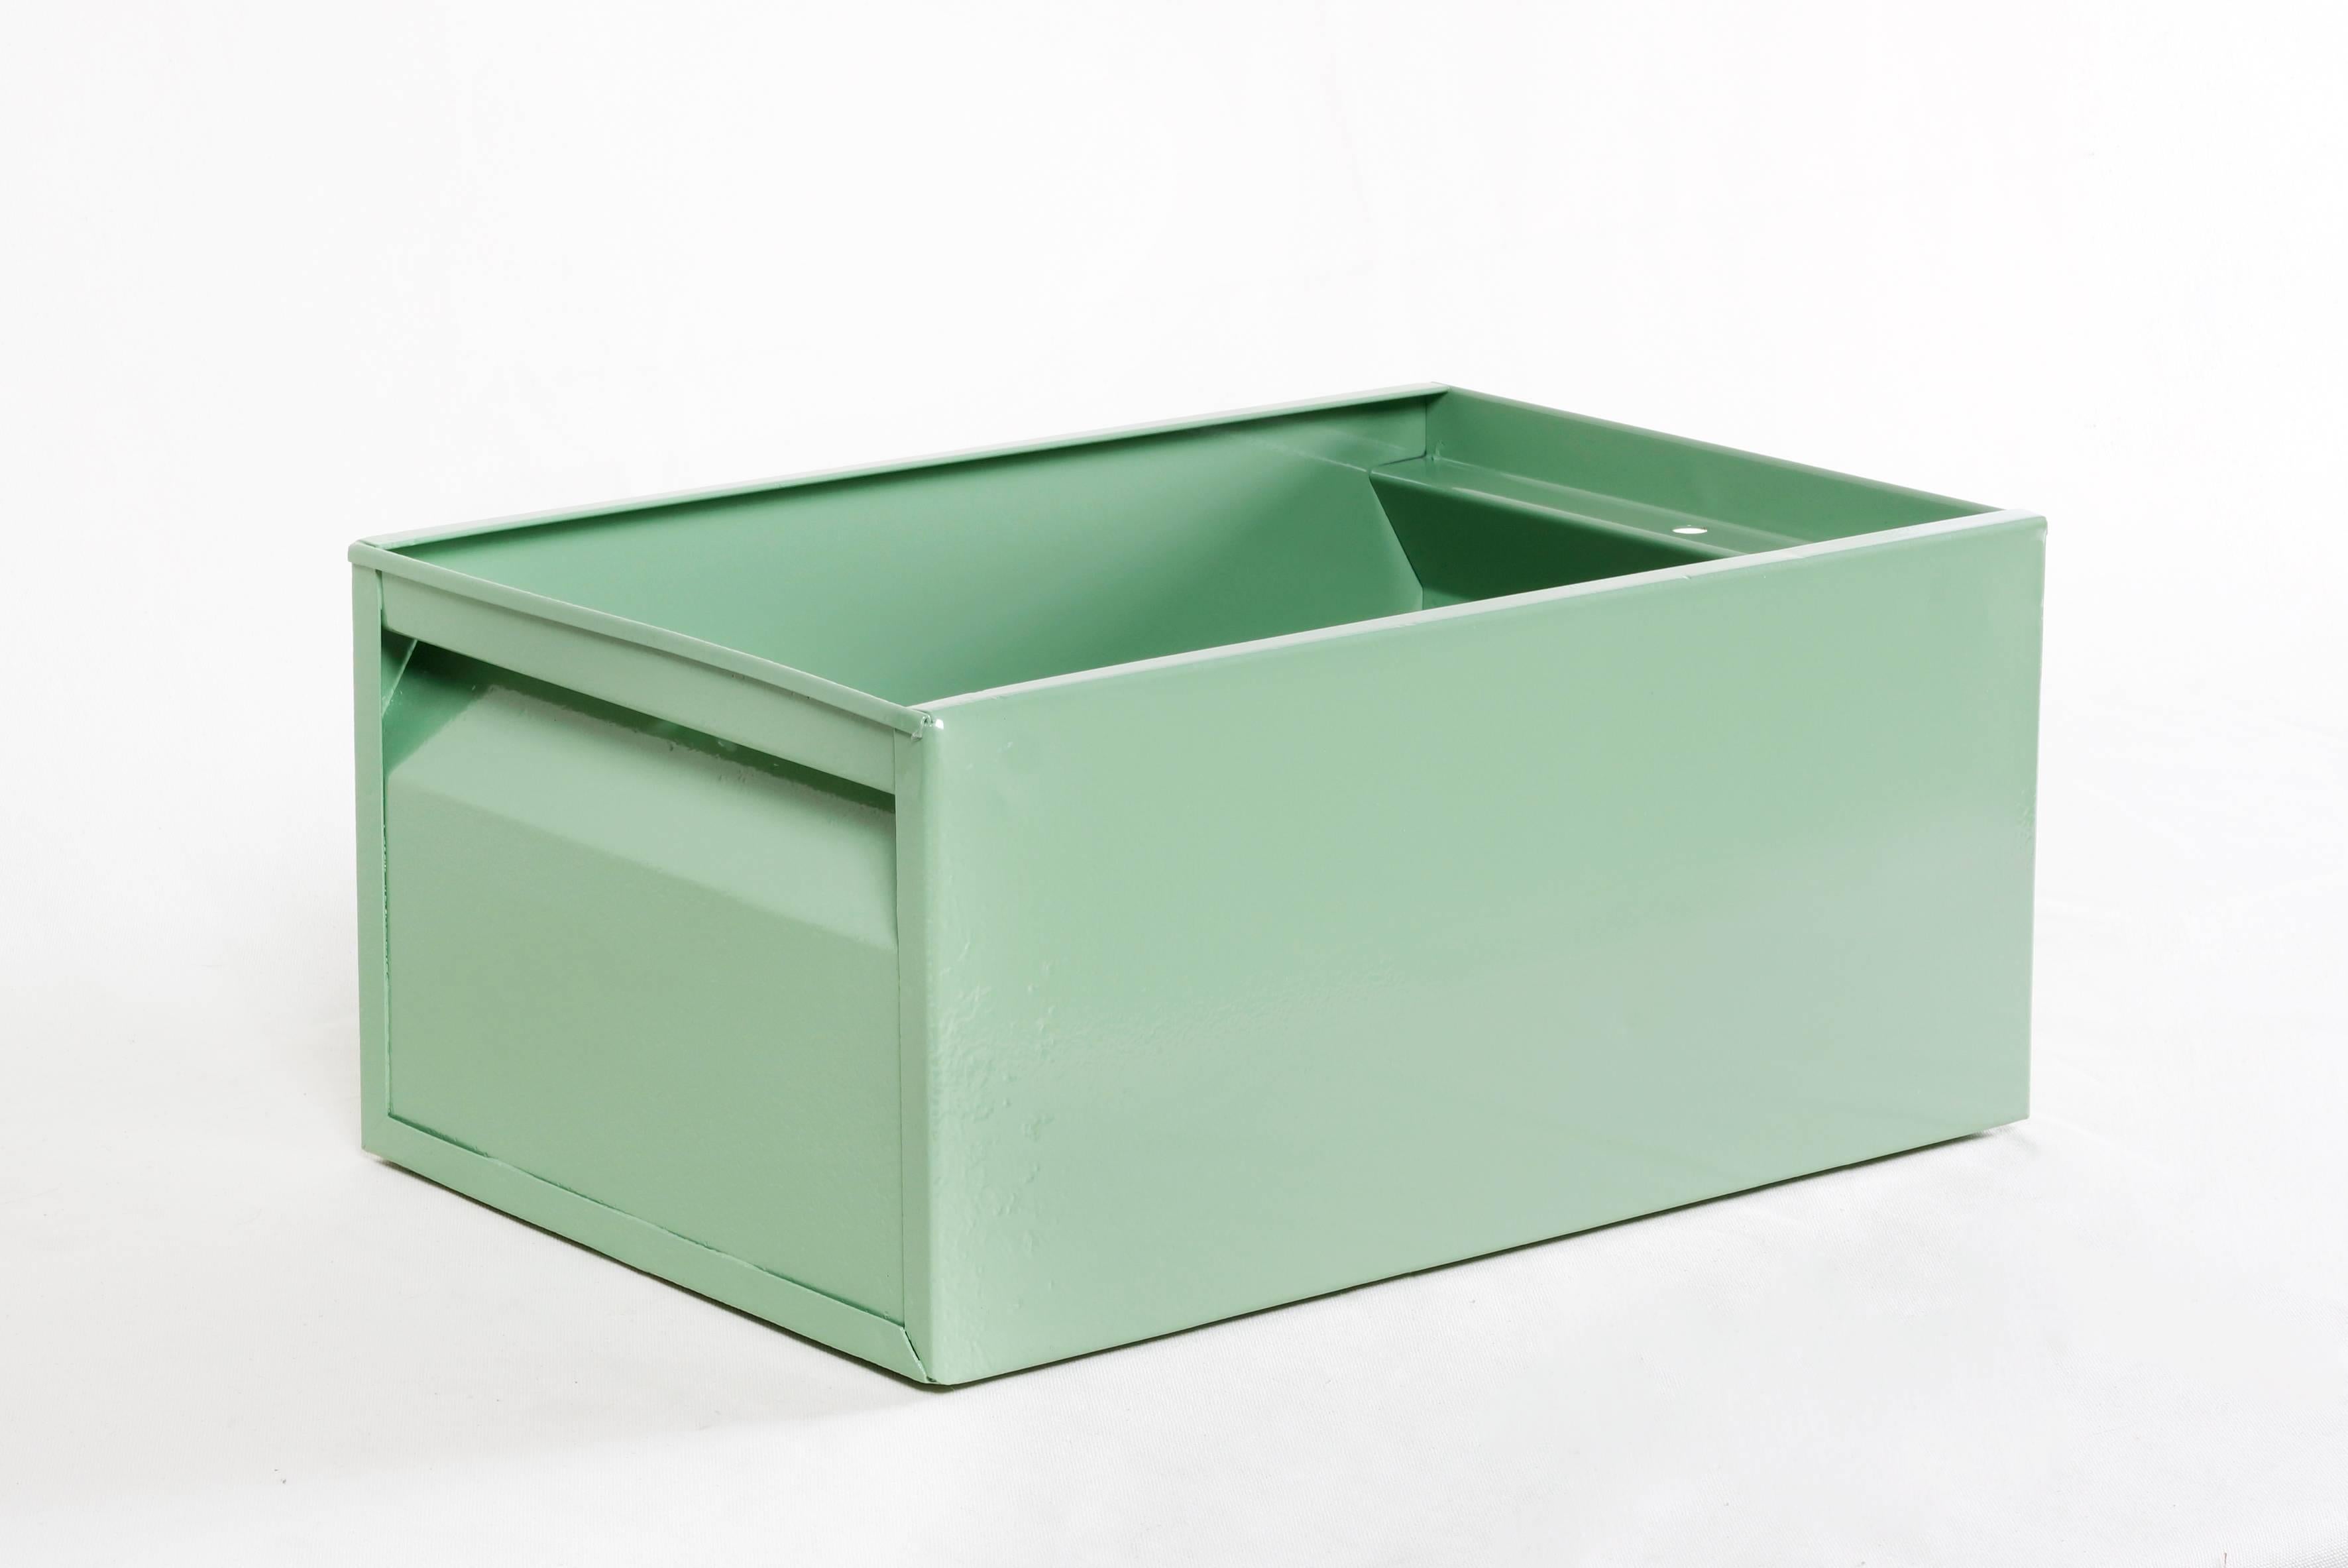 We refinished this fantastic 1940s Industrial storage bin in a gloss Sage Green powder coat. Perfect for storing just about anything from office supplies and tools to reading material. This heavy-duty steel organizer is sure to keep your workplace